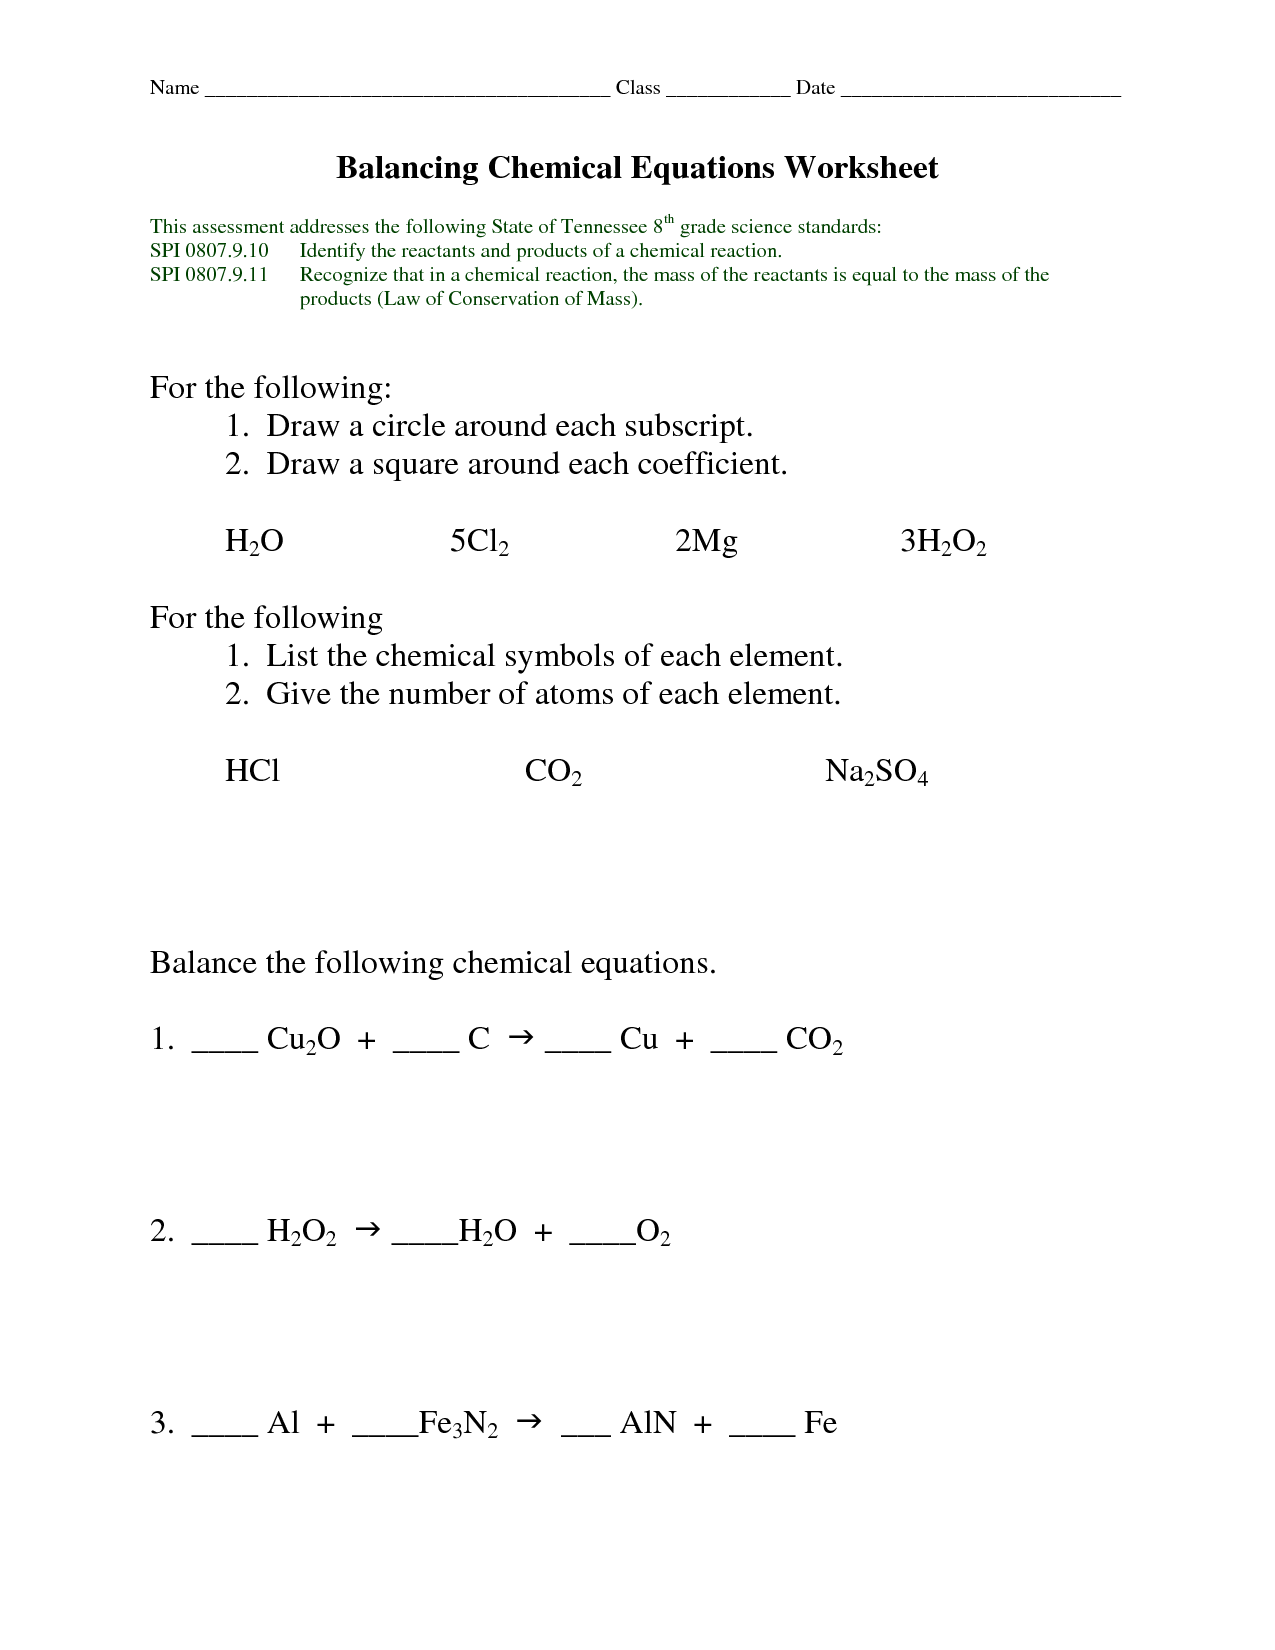 13 Best Images of Balancing Equations Worksheet Answer Key ...